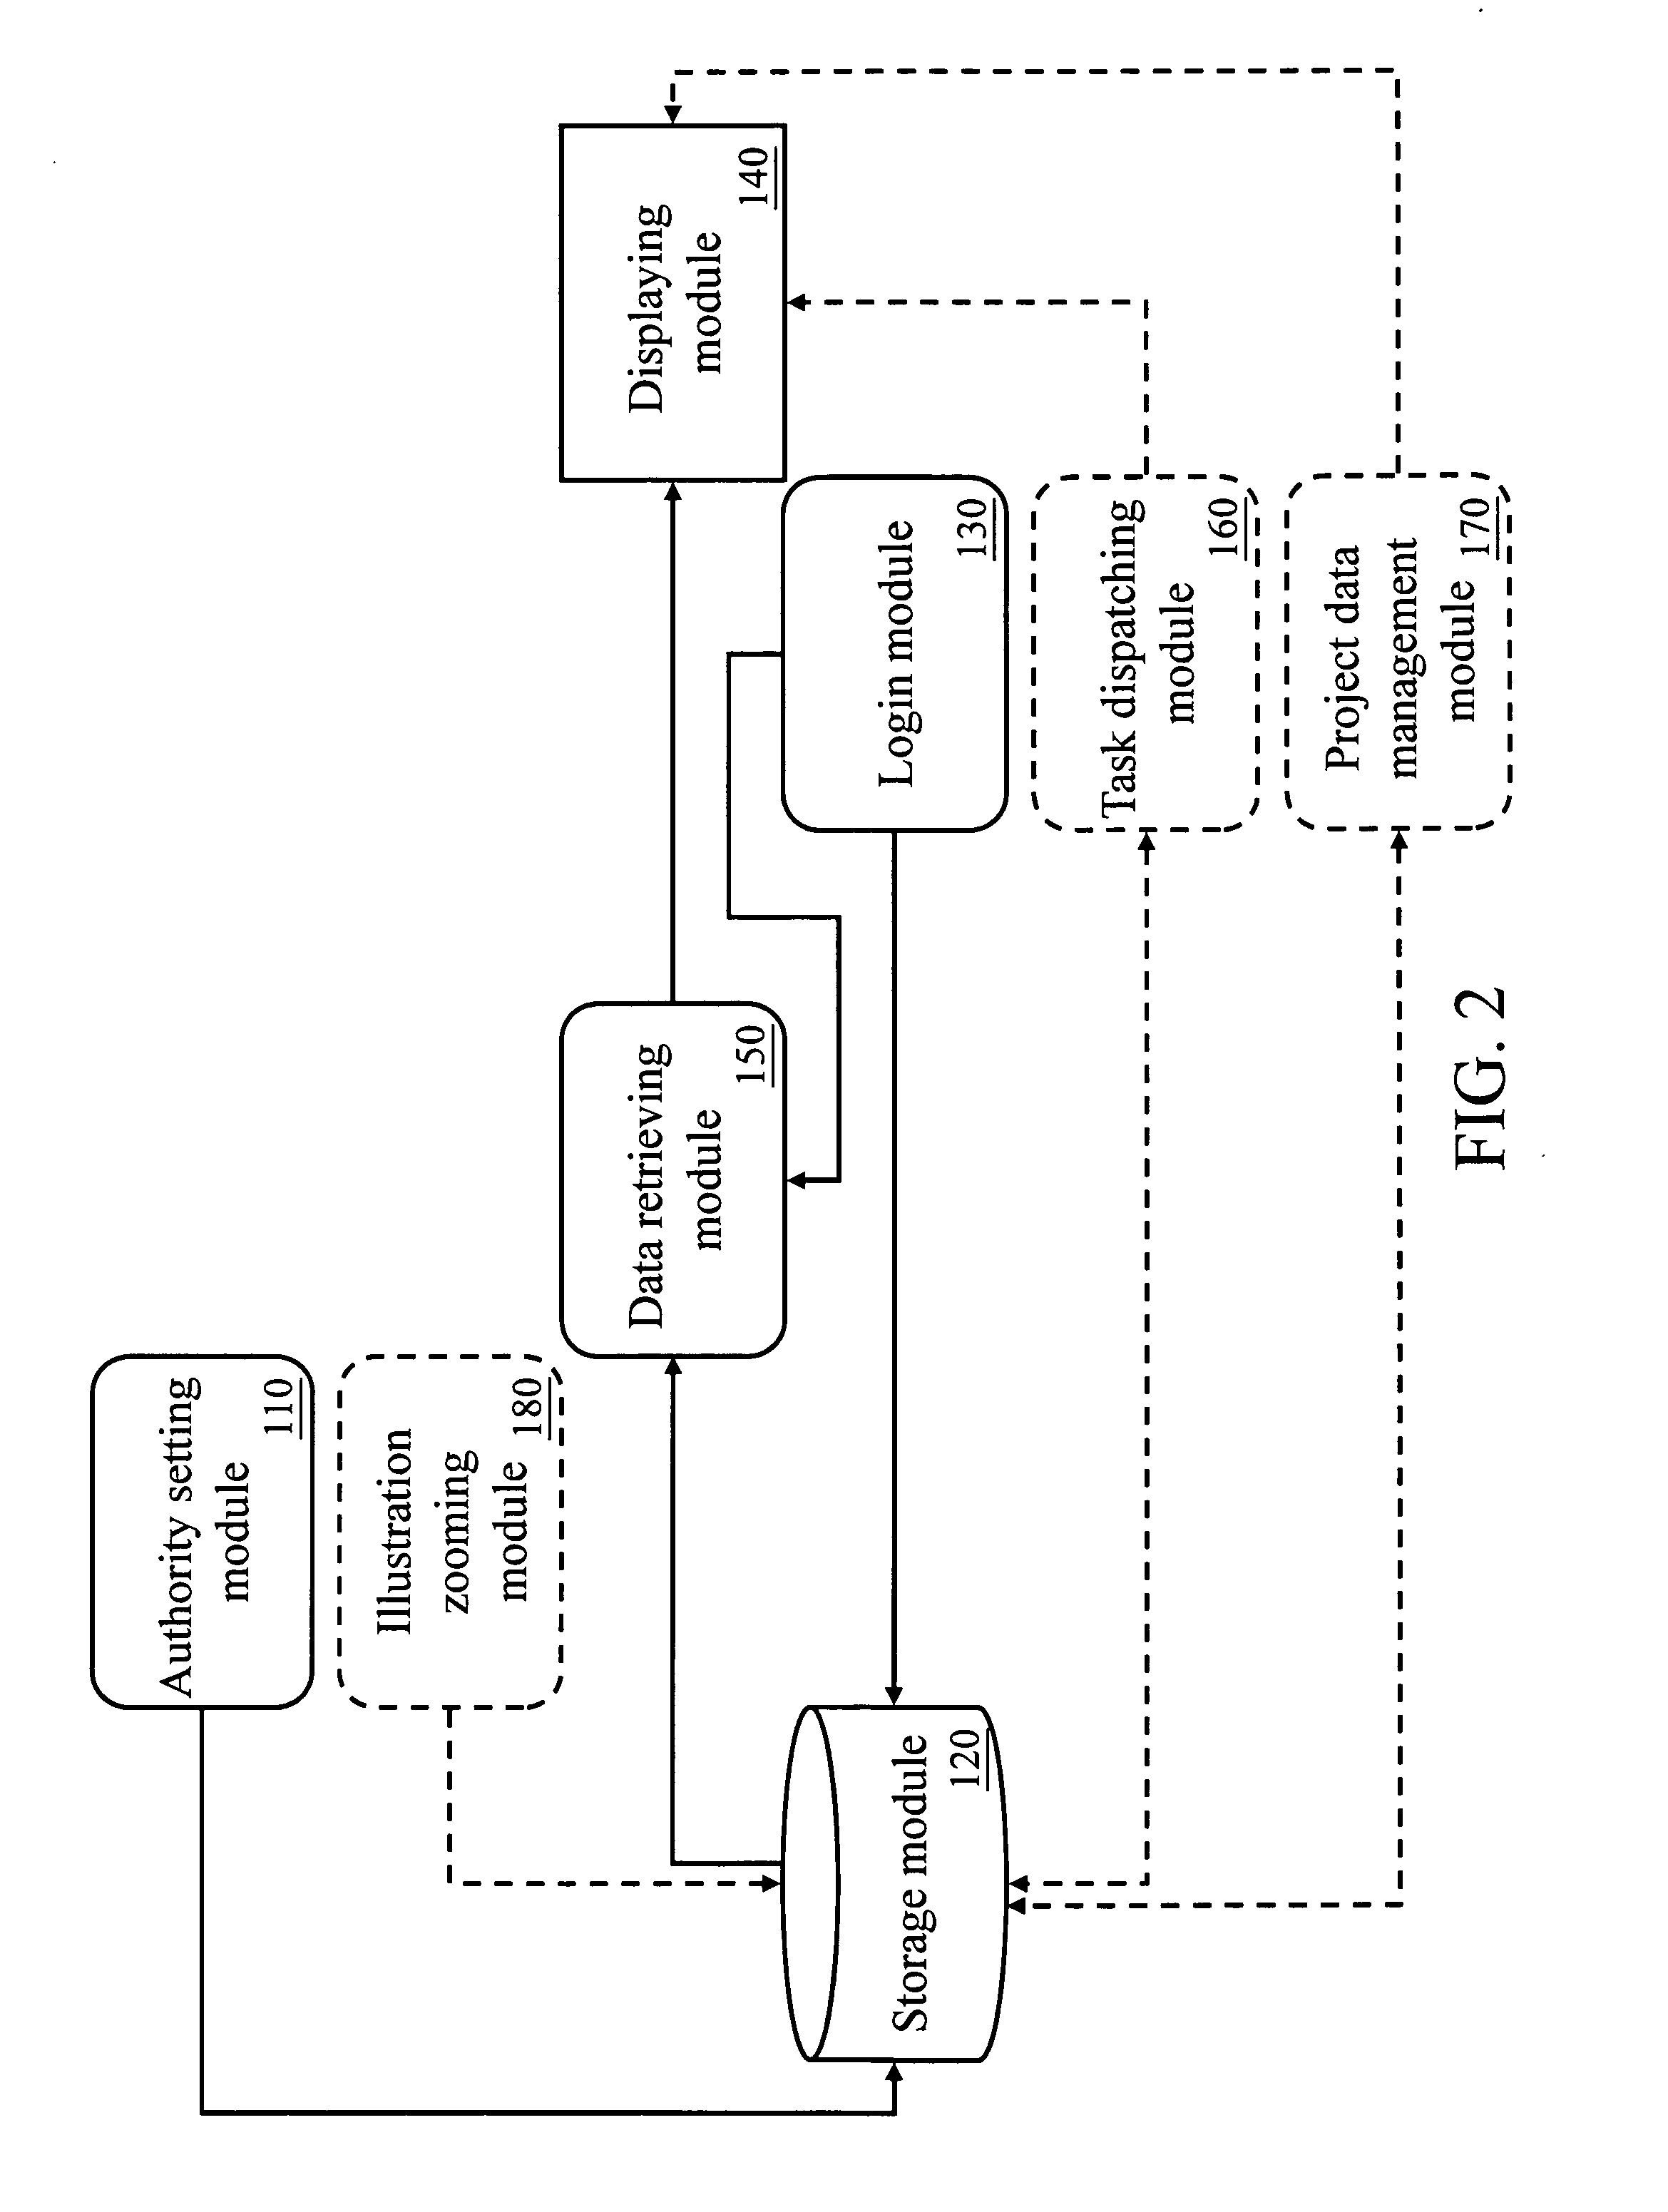 Management system of technical literature data and method thereof